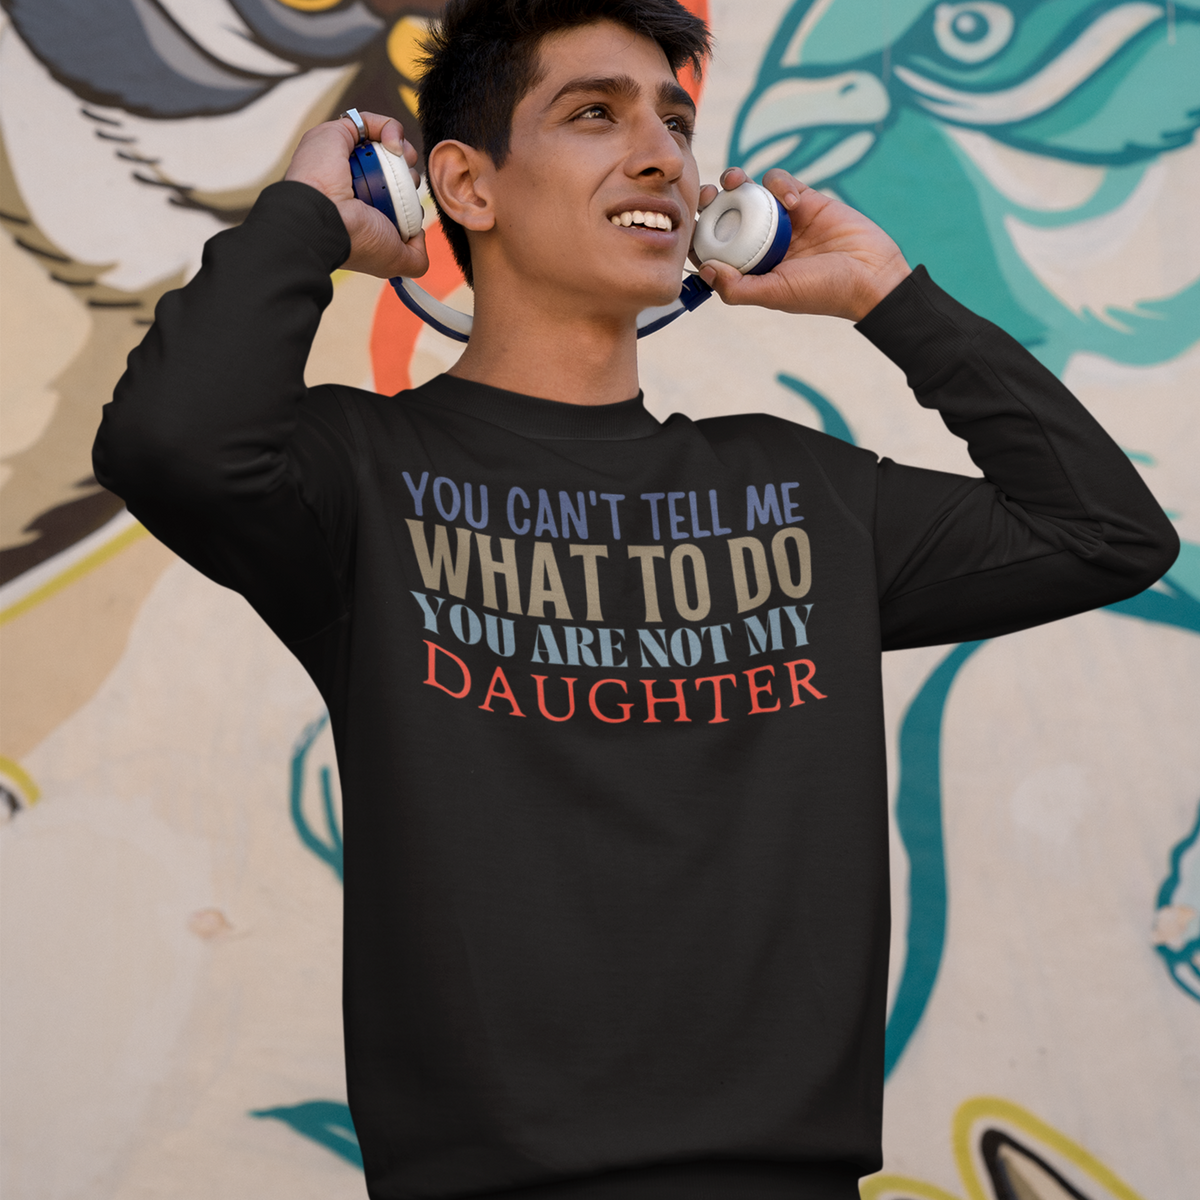 Dad sweatshirt, fathers day shirt, funny mens shirt, sweatshirt, gift for him, gift for her, funny mom tee, funny dad tee, new papa shirt, father sweatshirt, you can't tell me what to do you are not my daughter, new dad shirt